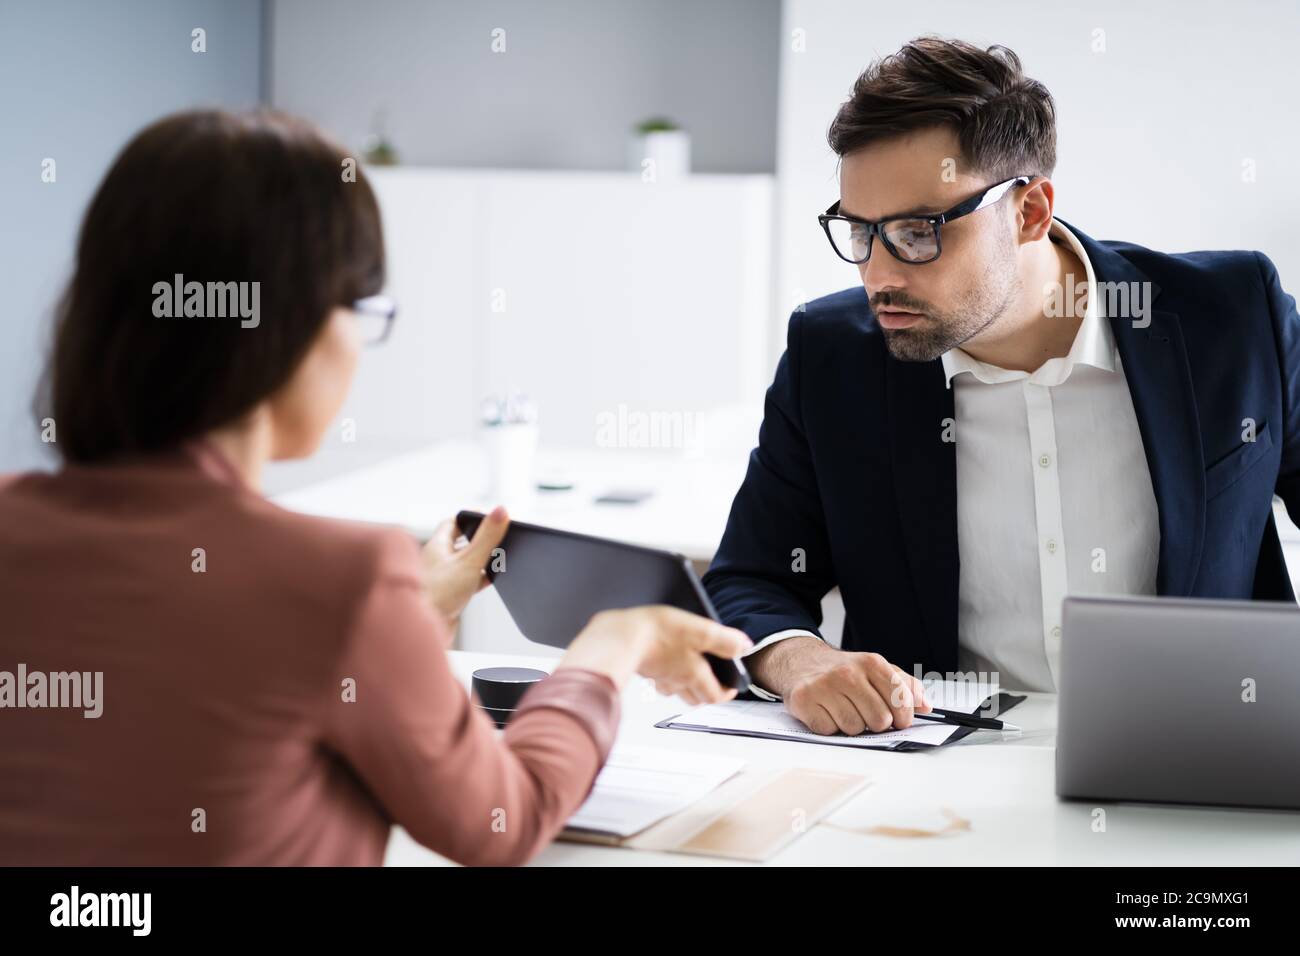 Financial Professionals At Business Meeting Using Digital Tablet Stock Photo